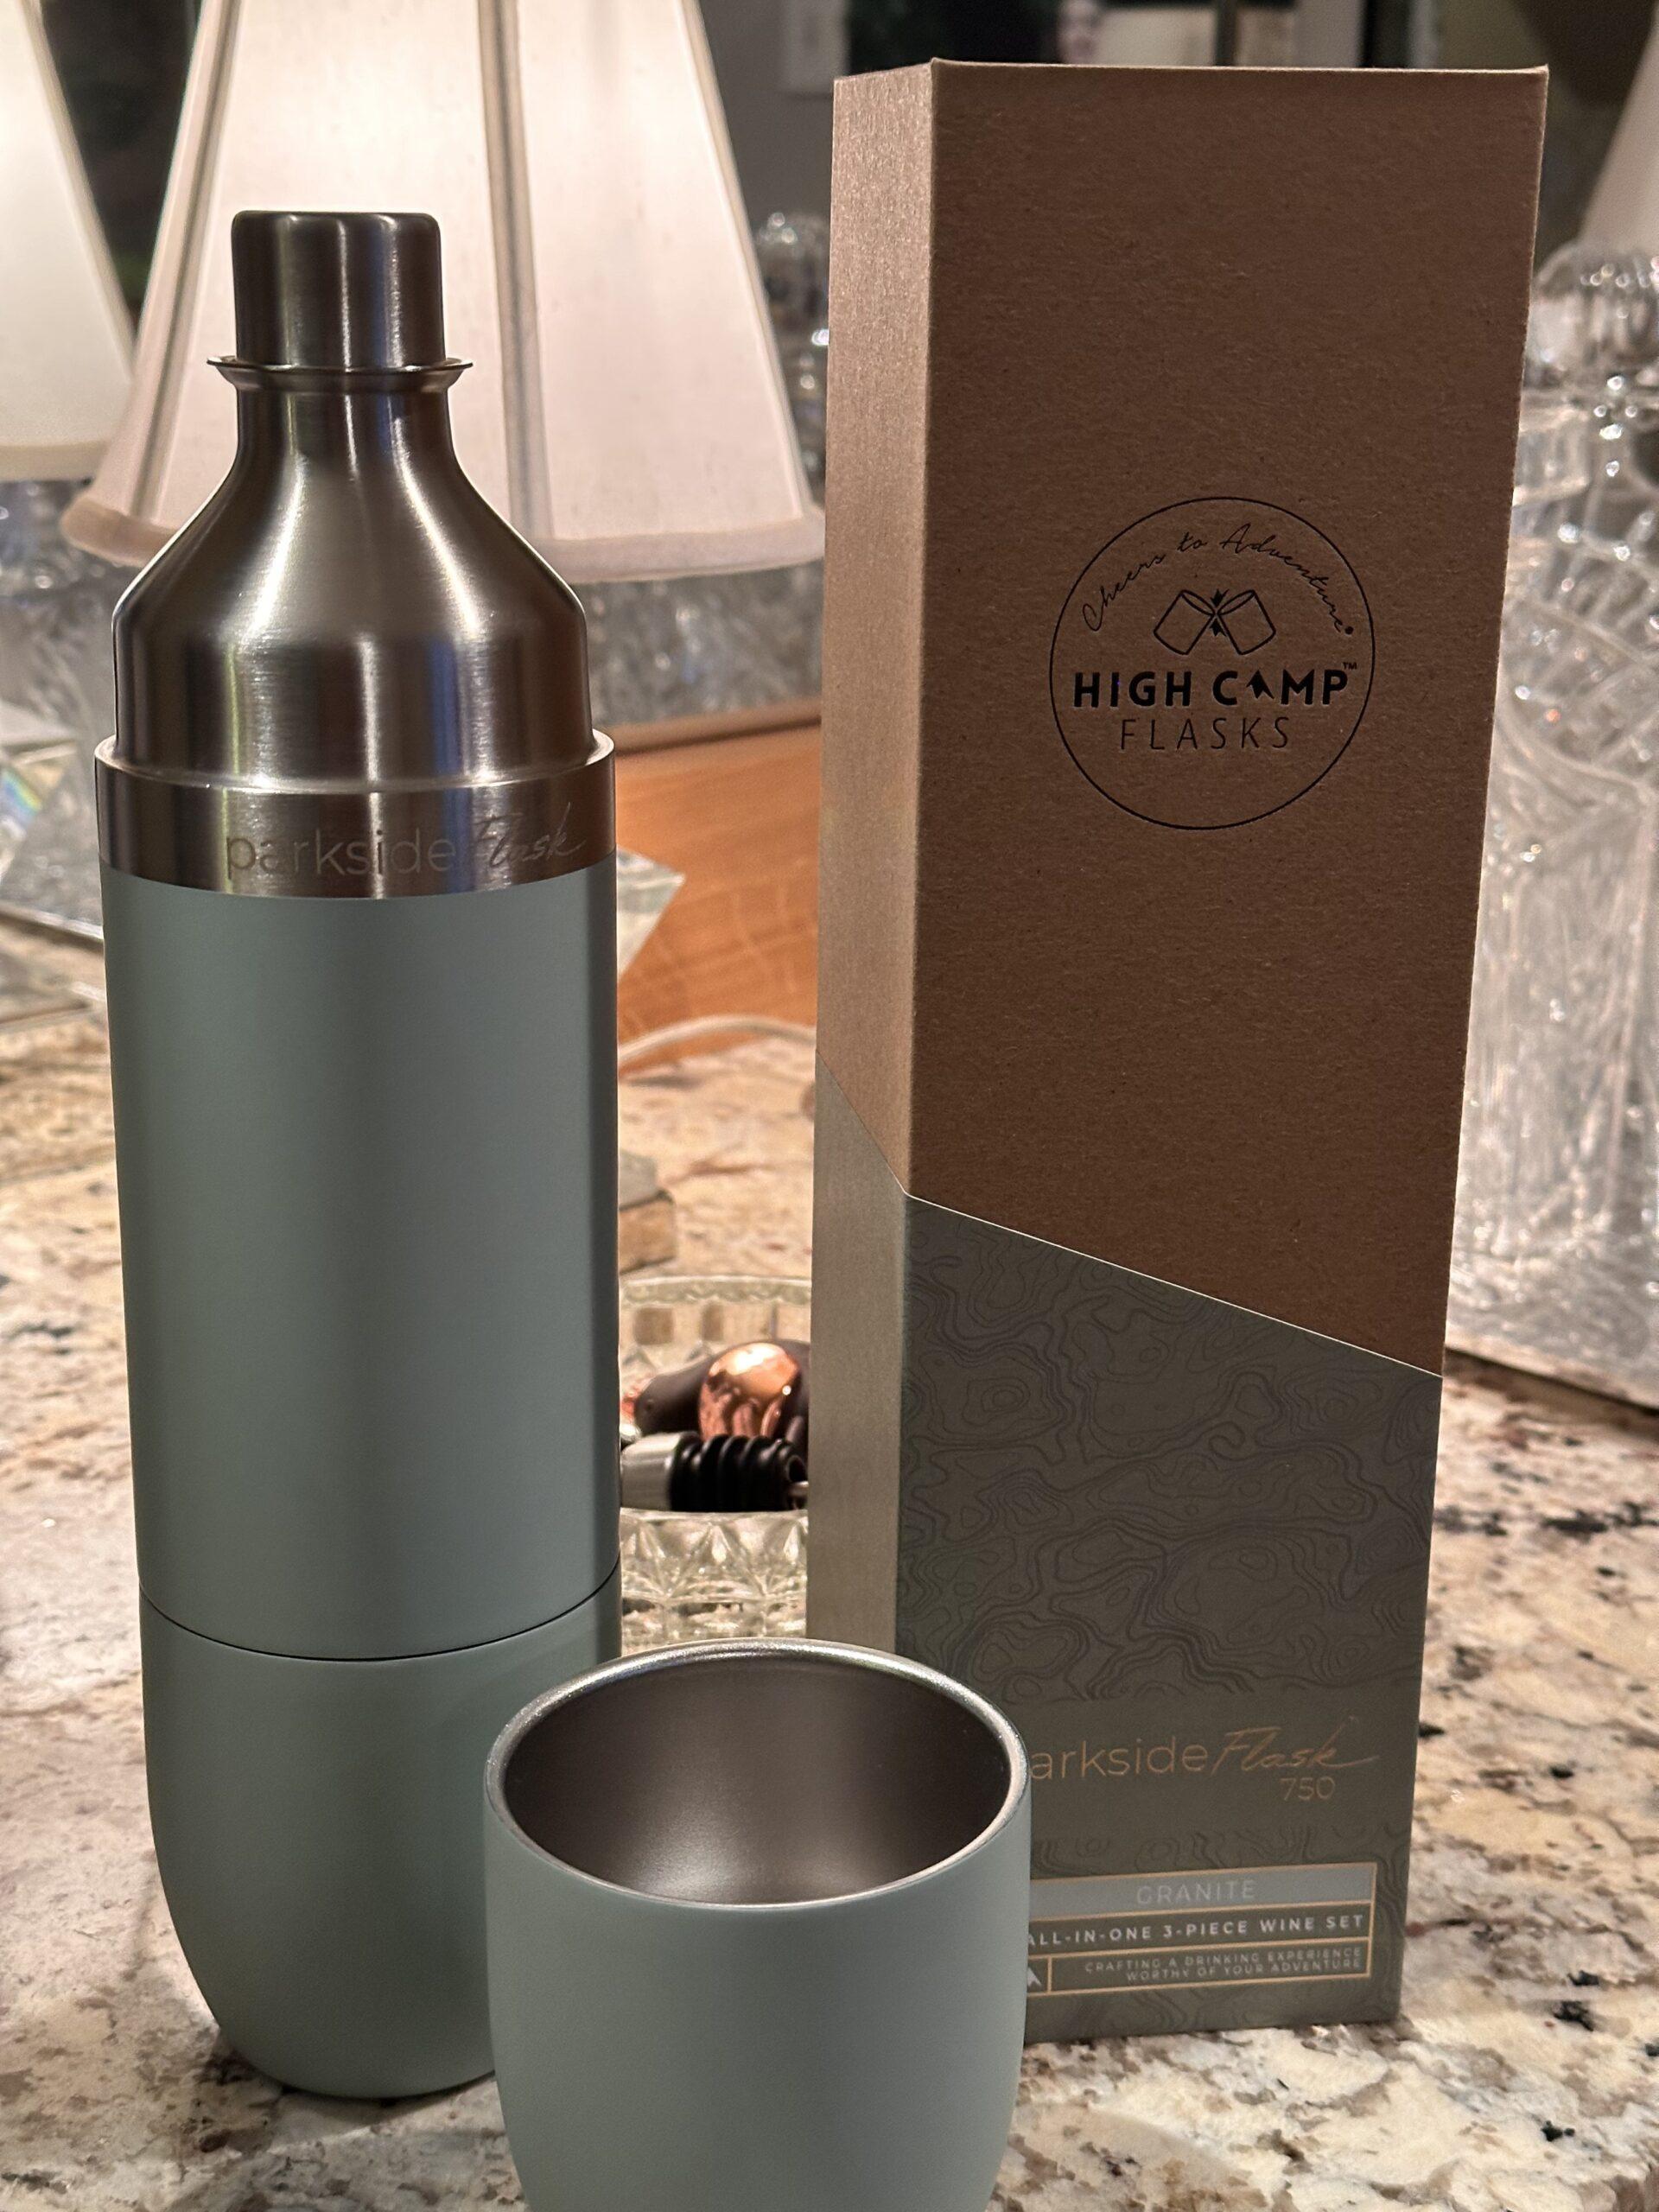 The Parkside Flask by High Camp Flasks is my go-to for any wine travel packing list.